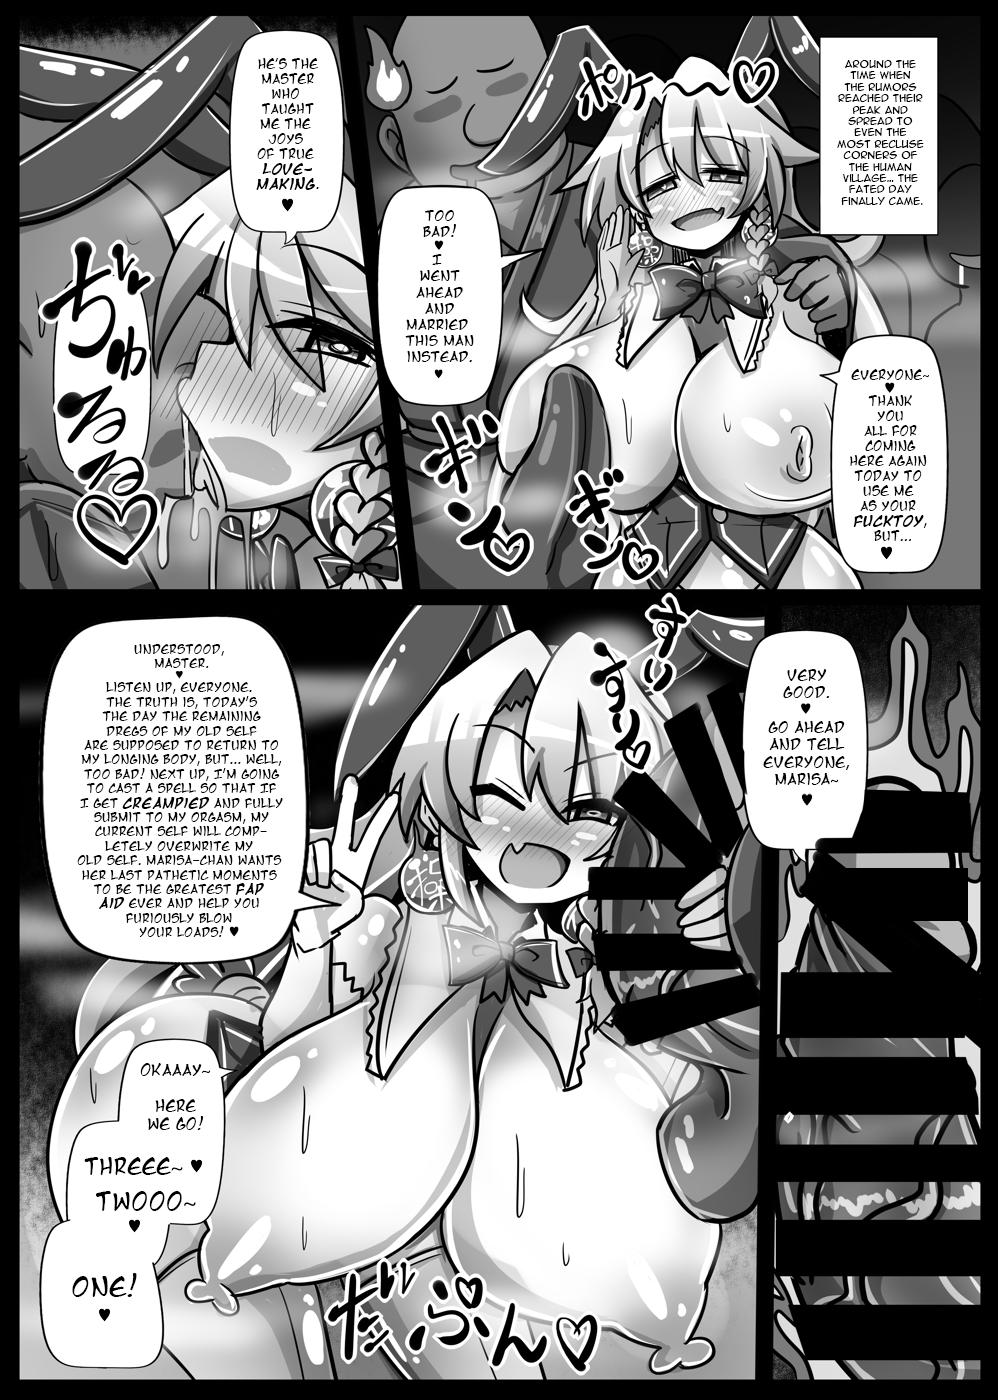 France Paradise of Fake Lovers The Brainwashing of Young Maidens Story 2 - Touhou project Blackcock - Page 9